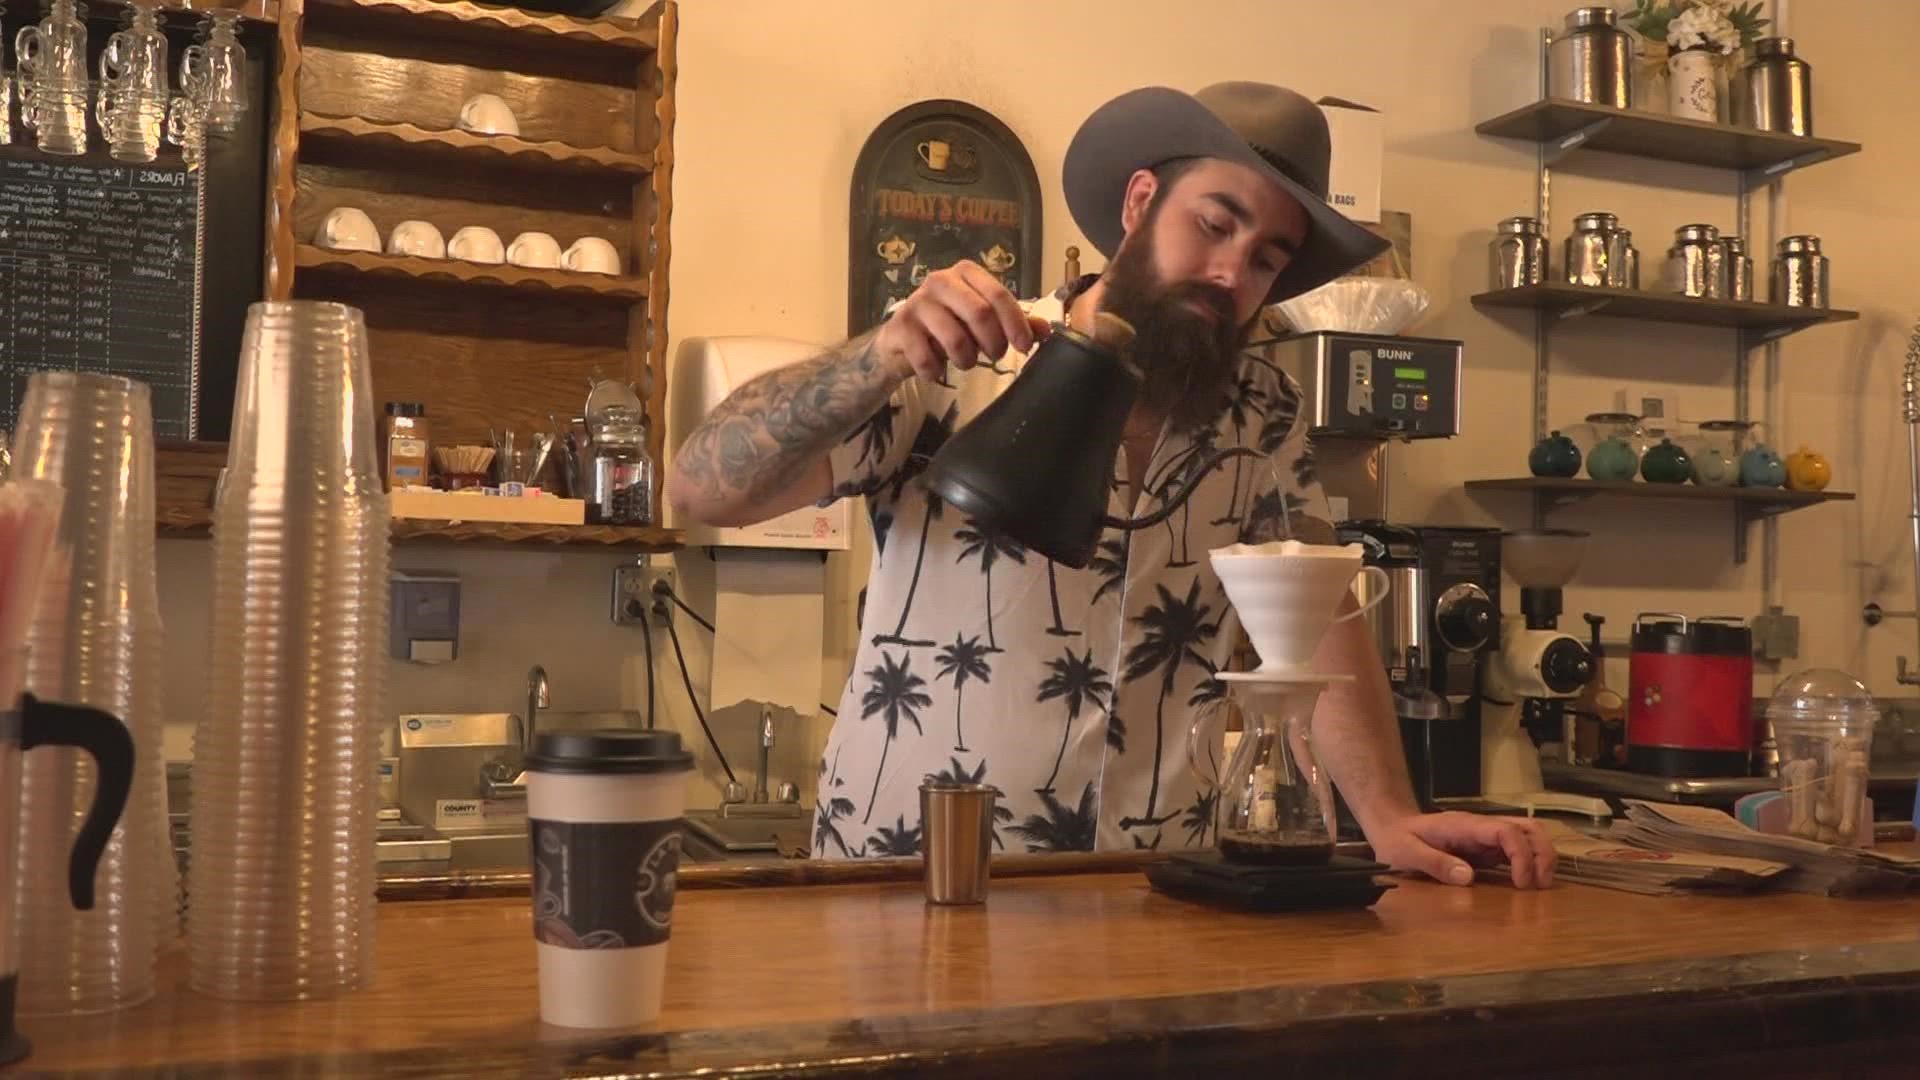 The owners say it's the first authentic, Colombian-style coffee shop in the St. Louis area.